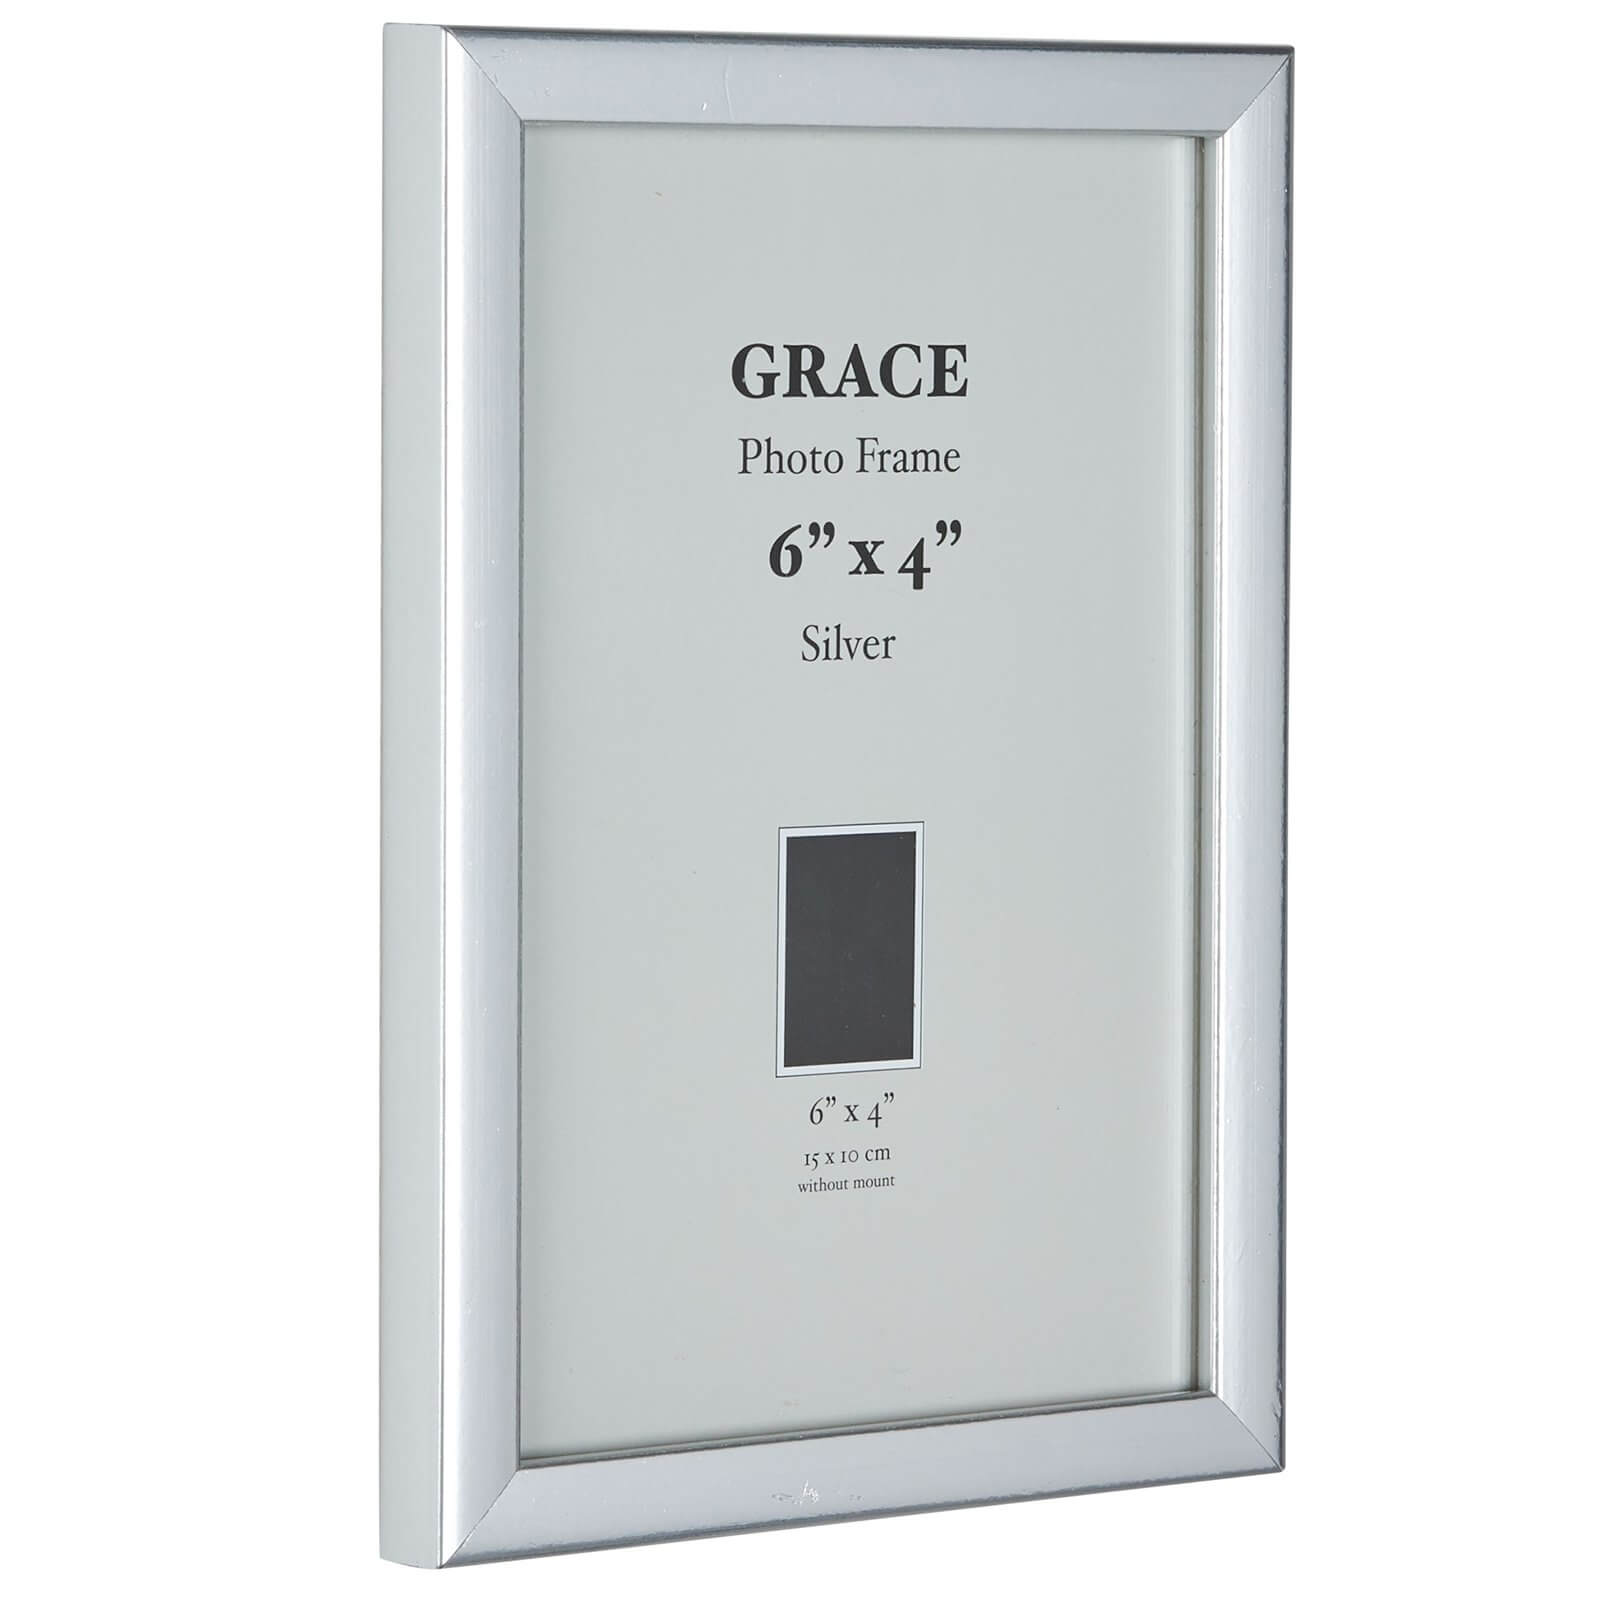 Grace Picture Frame 6 x 4 - Silver